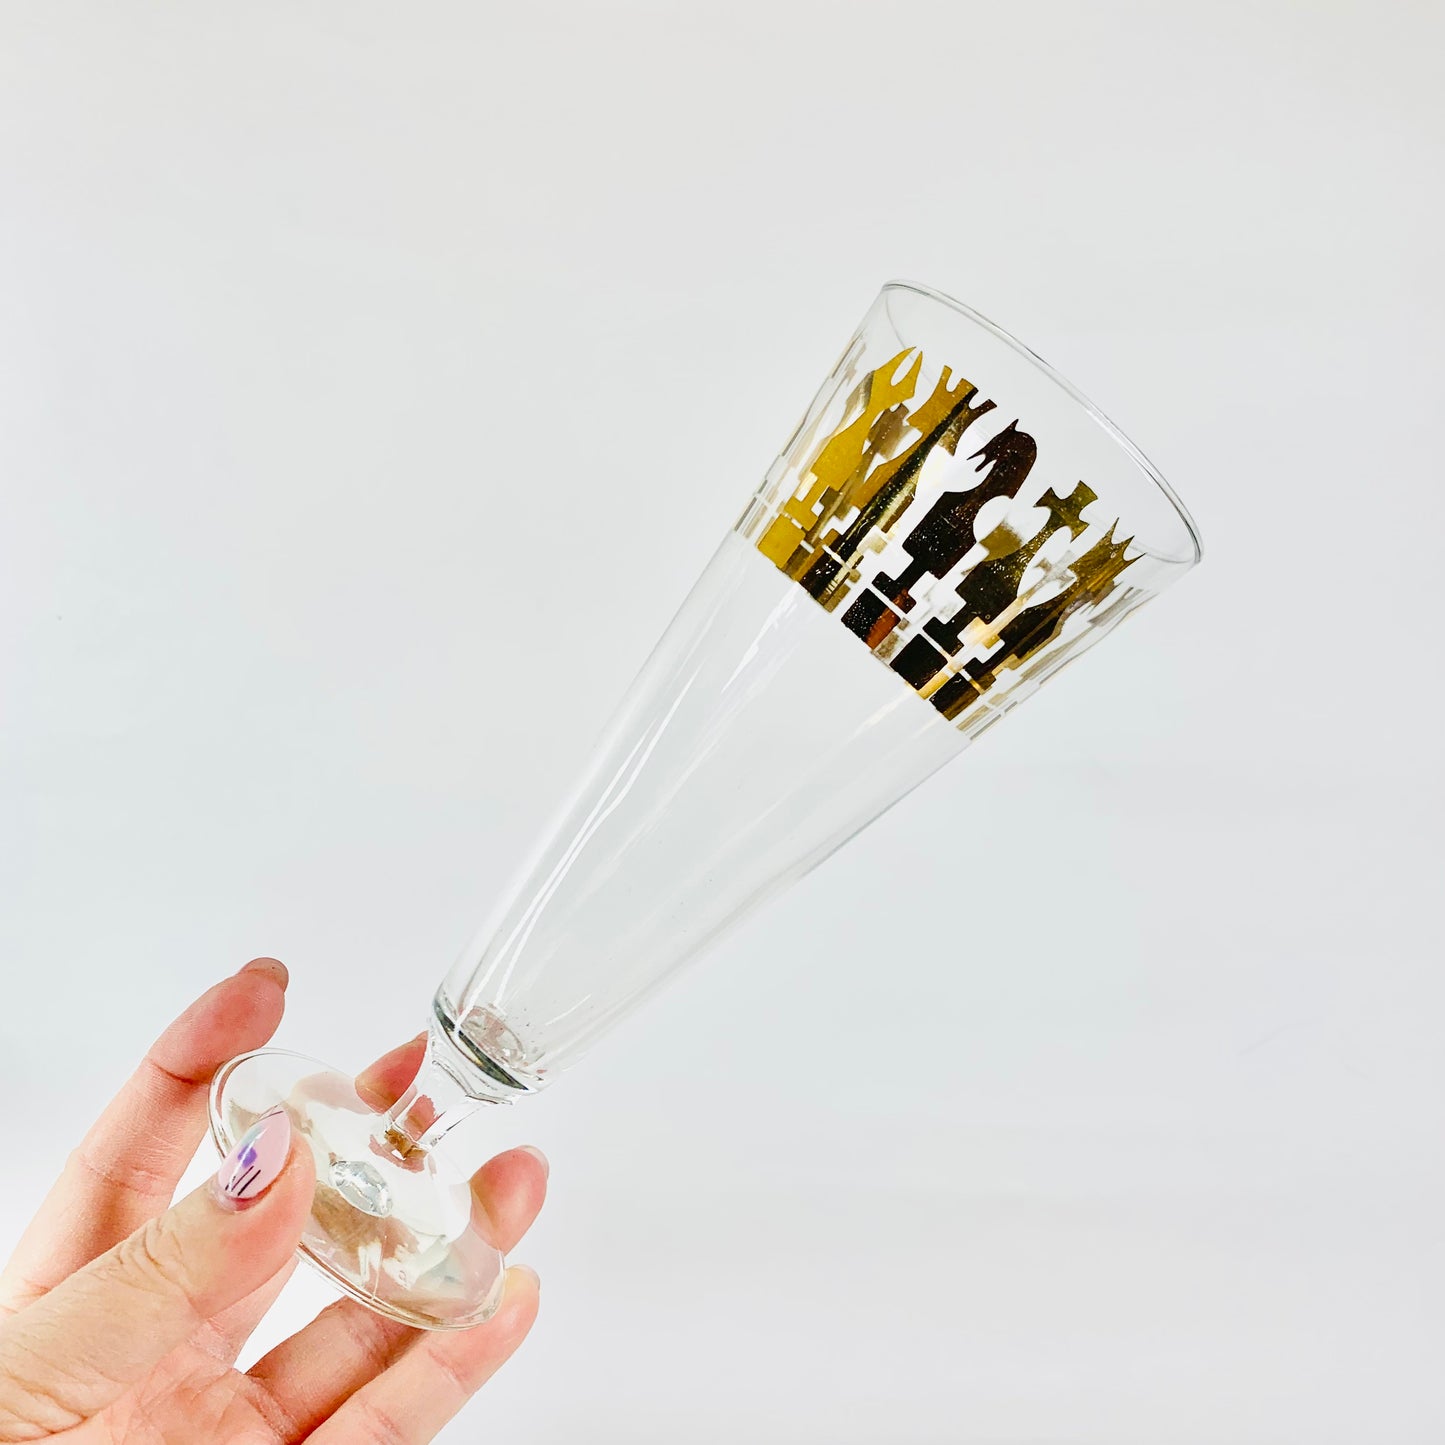 Extremely rare 1940s gold gilding clear glass champagne flutes with chess pattern